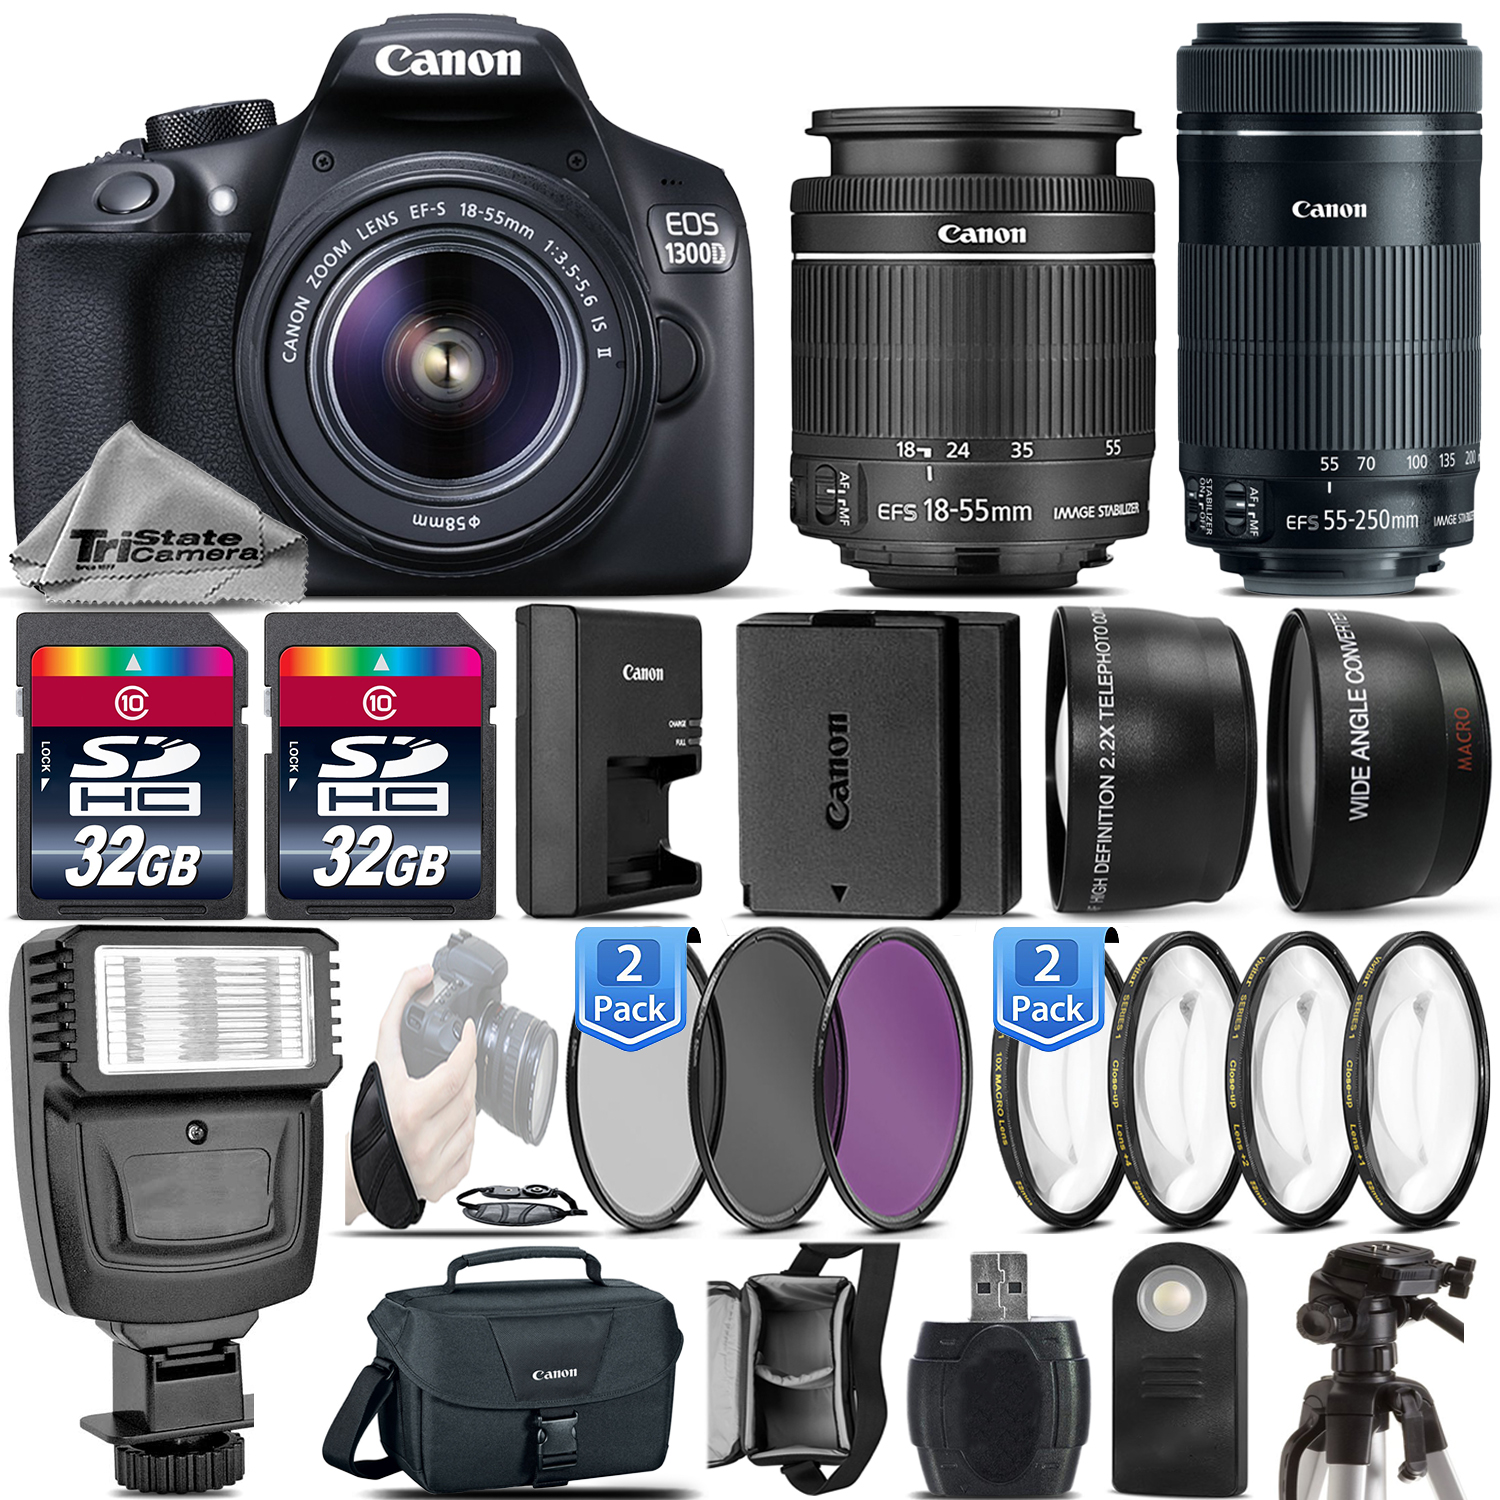 EOS Rebel 1300D DSLR Camera + 18-55mm IS II + 55-250mm IS STM - 64GB Kit *FREE SHIPPING*